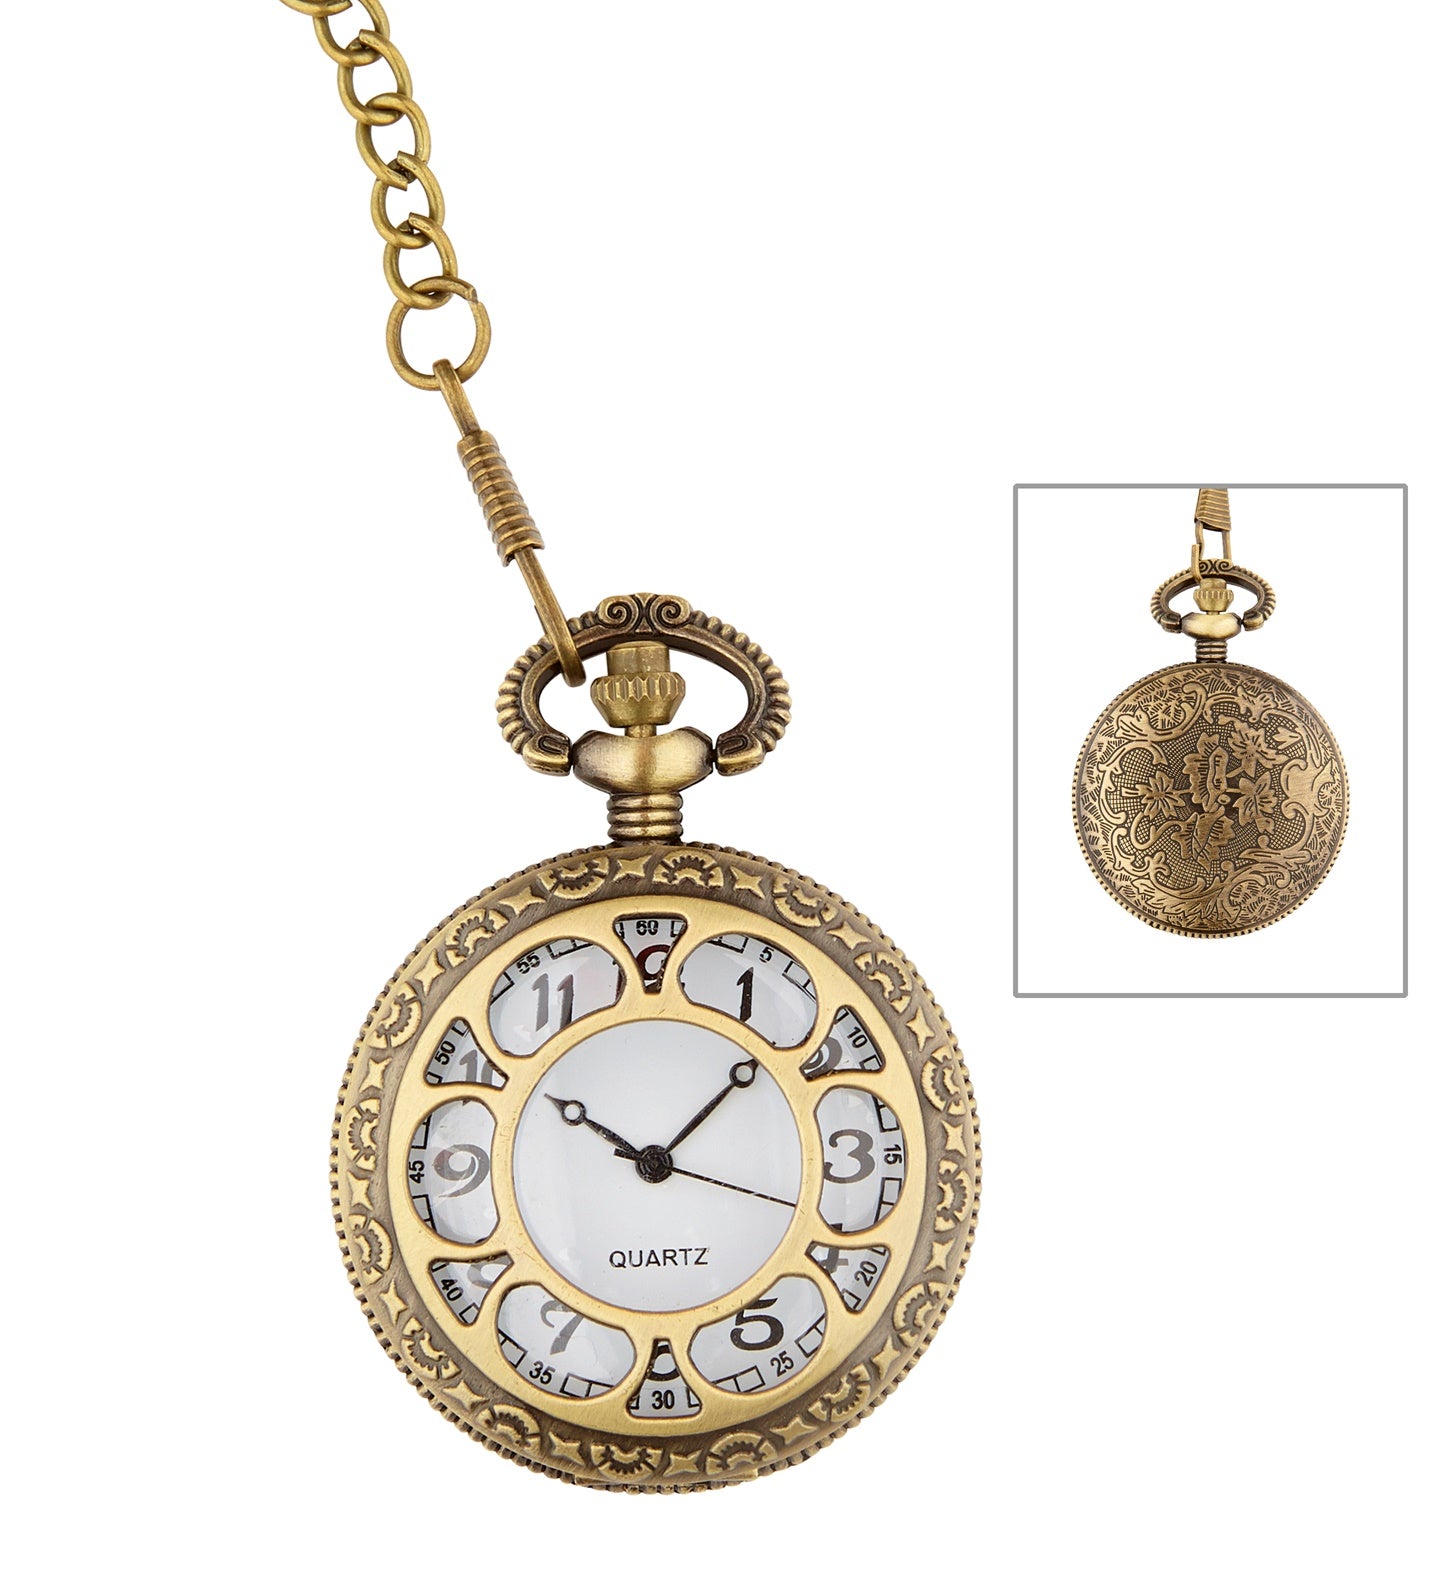 Mechanical Pocket Watch with Chain